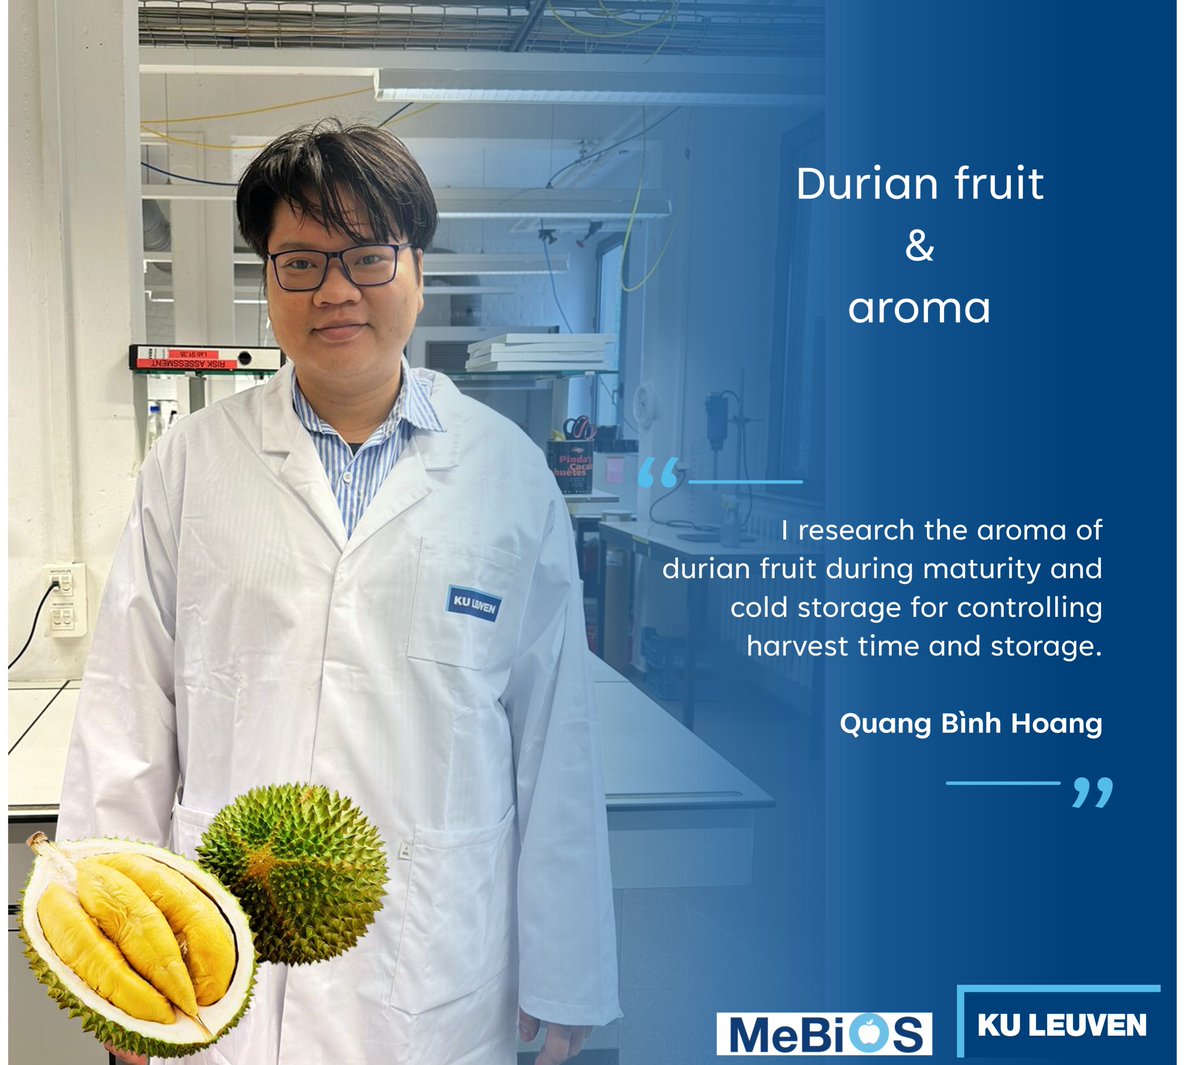 #NewScientist

Quang Binh Hoang has started as a #PhD researcher. He is going to investigate the aroma of #durian fruit during the maturity stage and cold storage. Based on these insights, #postharvest #technologies will be developed to improve the storage life of durian fruit.